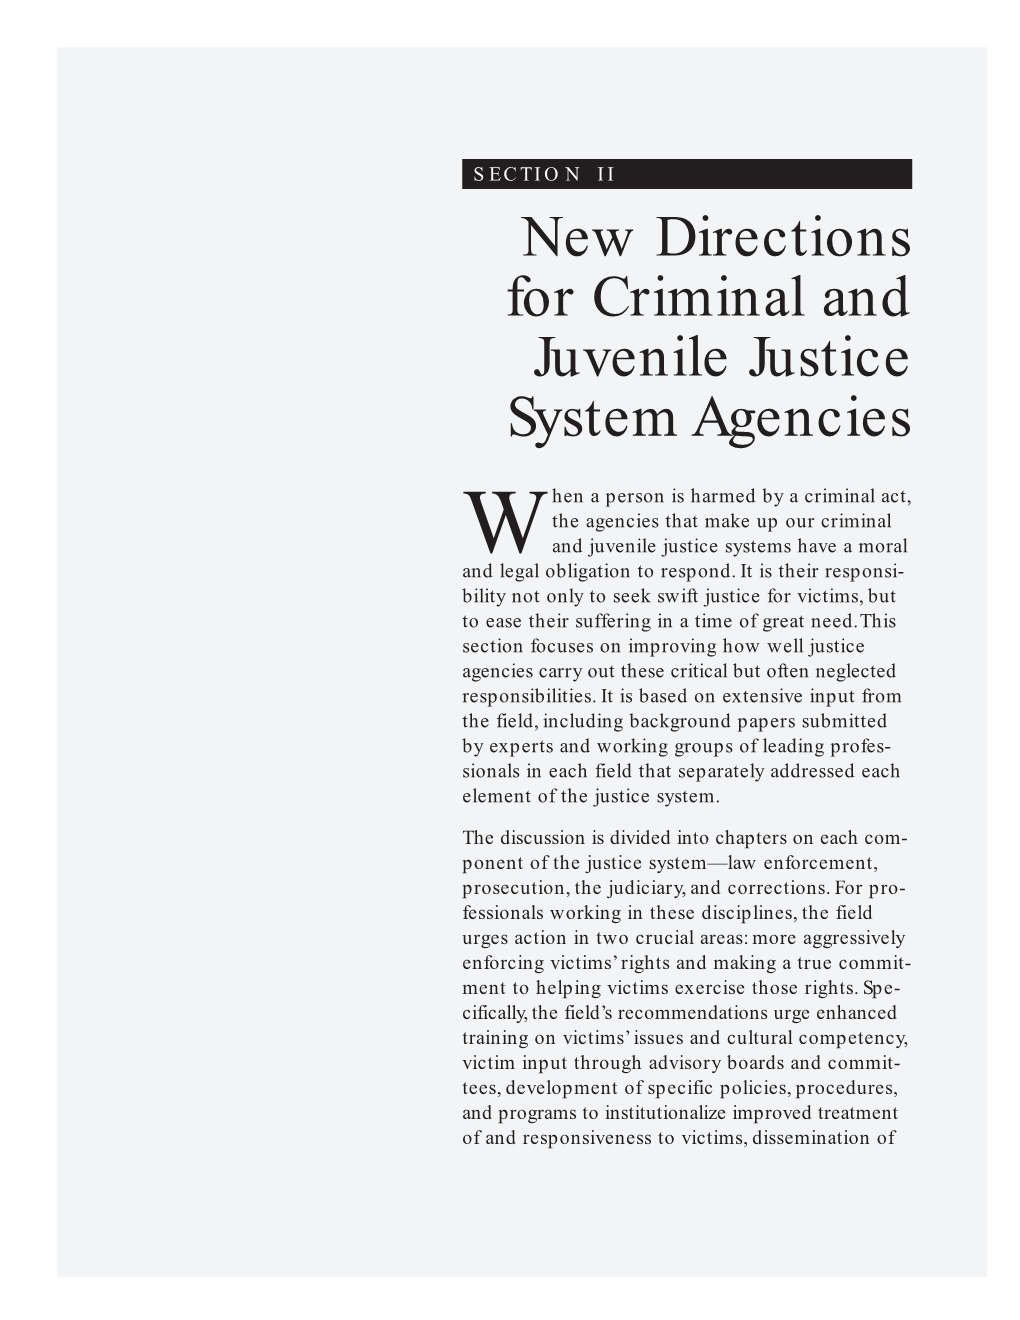 New Directions for Criminal and Juvenile Justice System Agencies